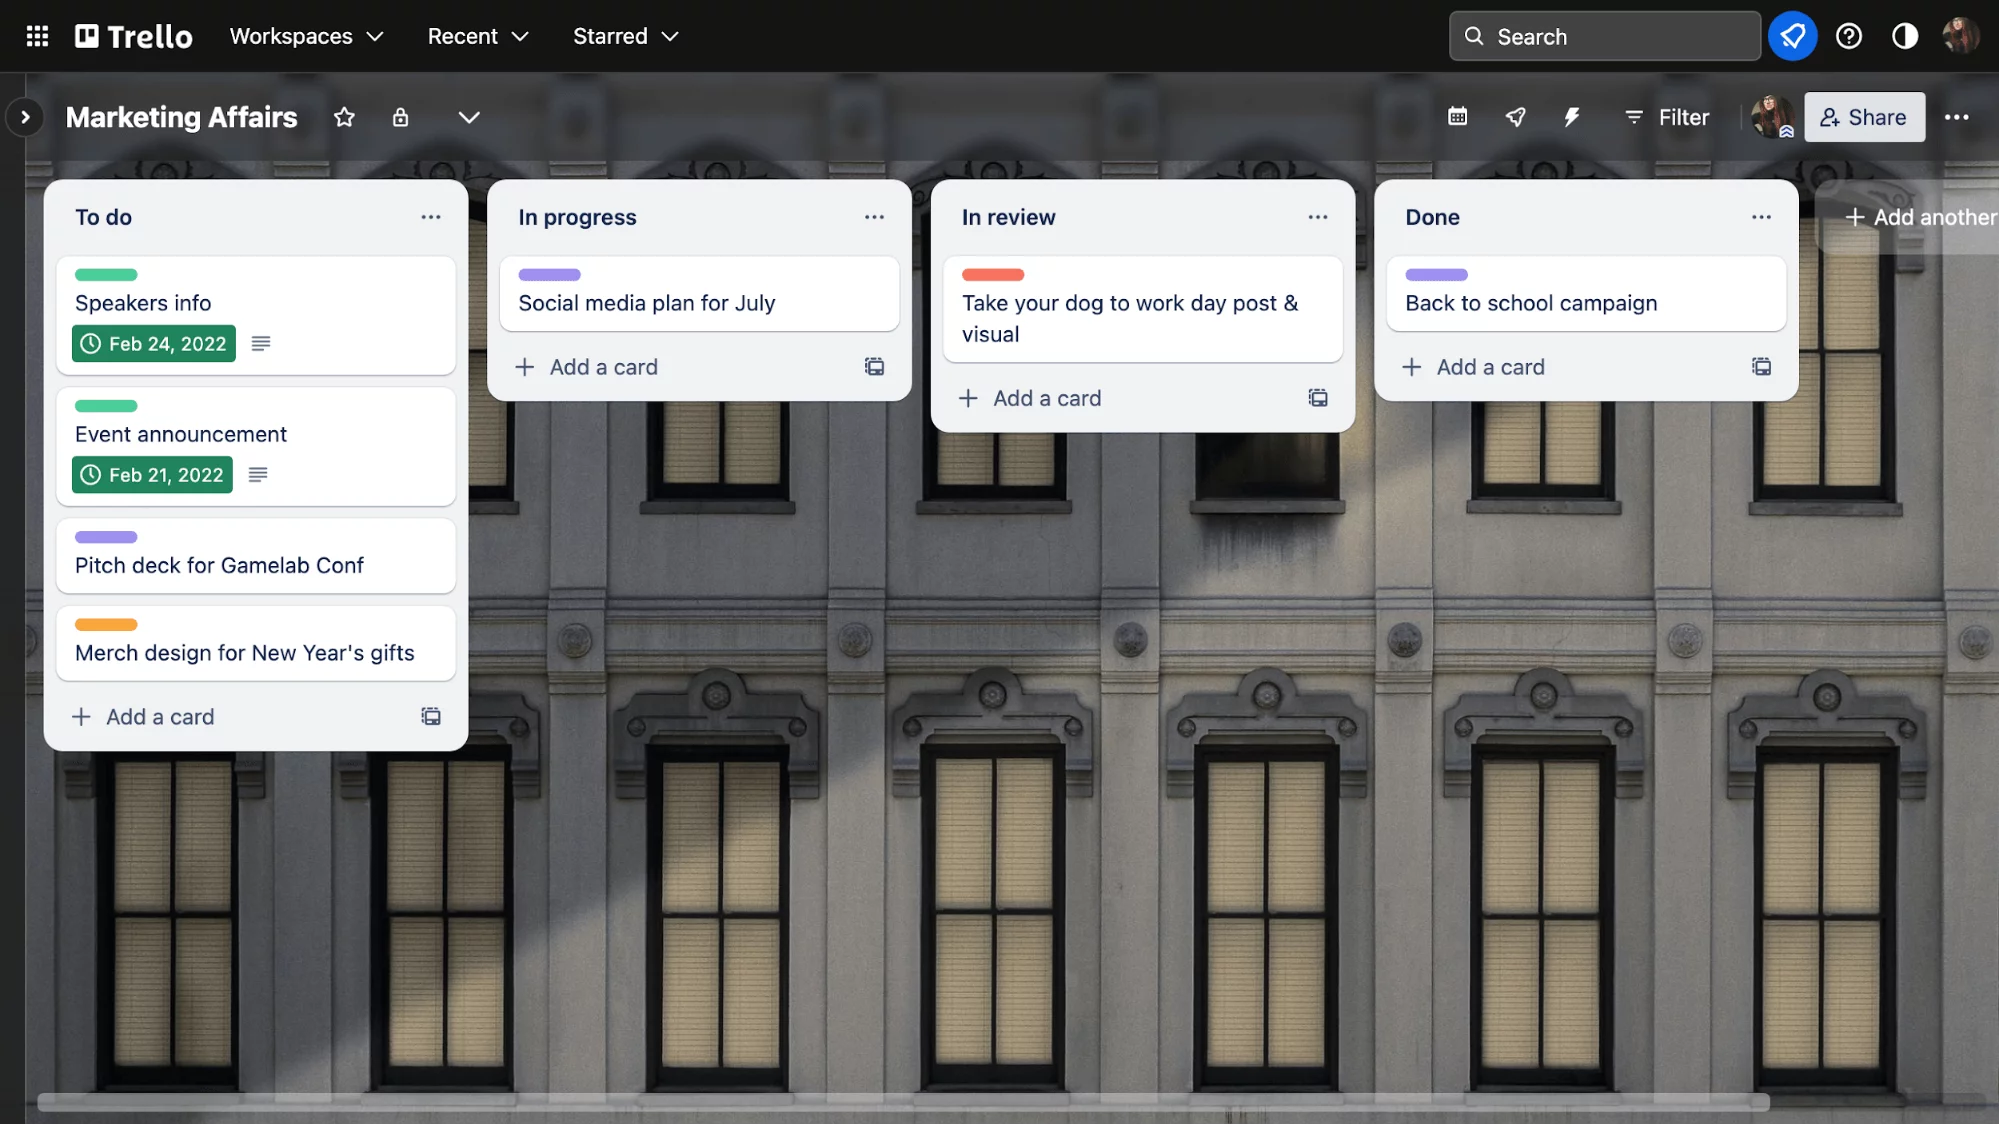 Trello marketing affairs dashboard with column statuses for to do, progress, in review and done.